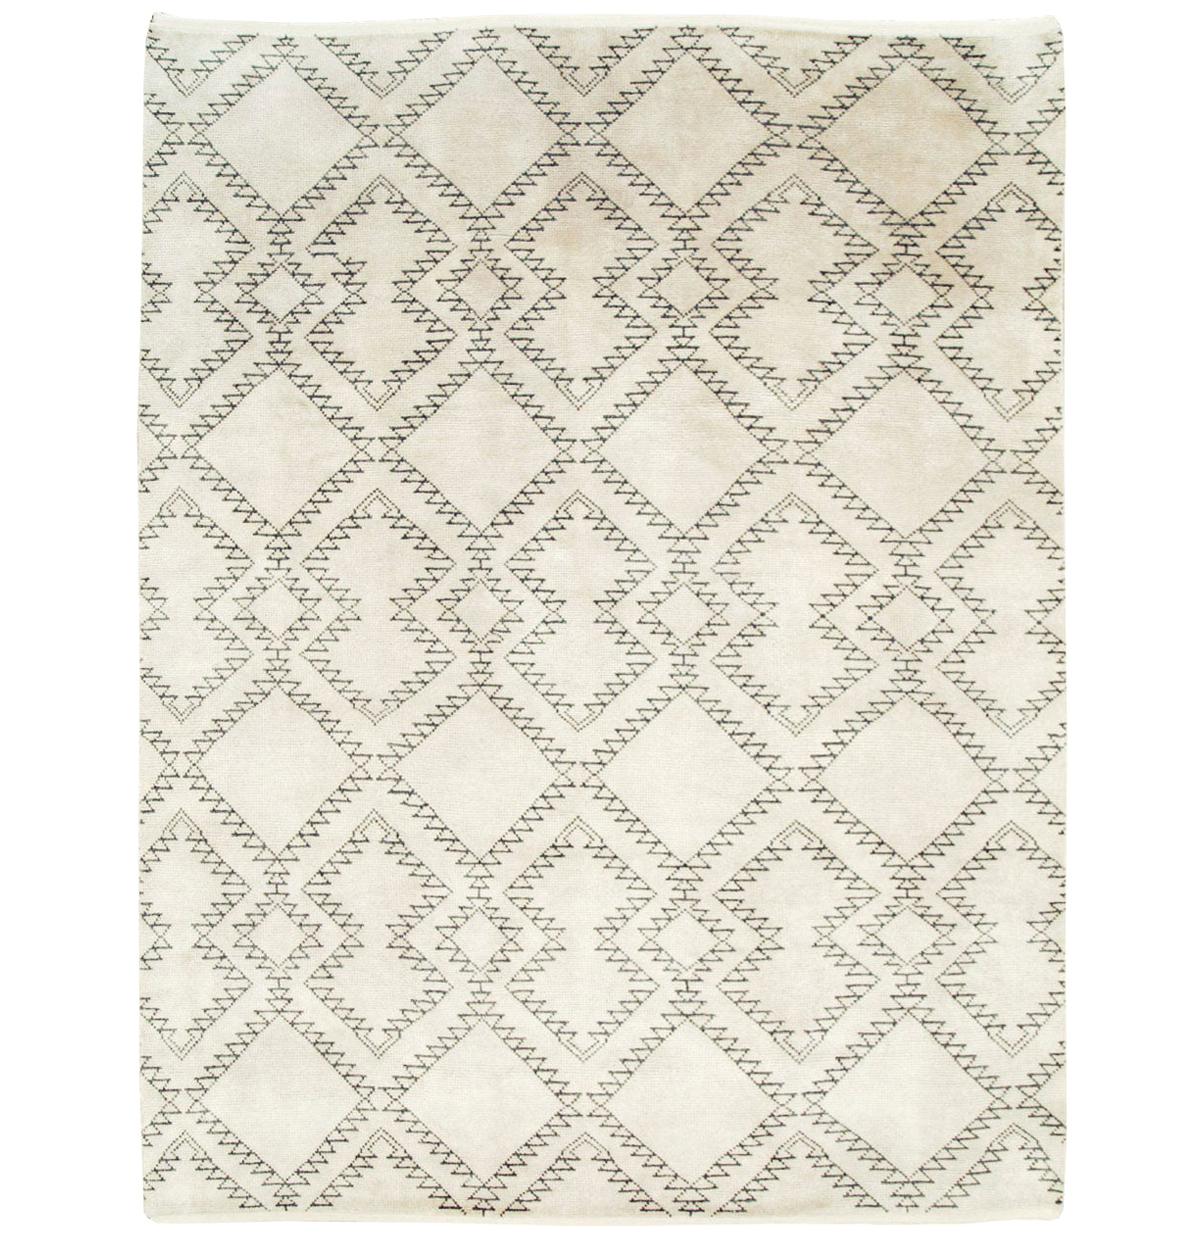 Contemporary Handmade Moroccan Room Size Carpet In Ivory and Charcoal